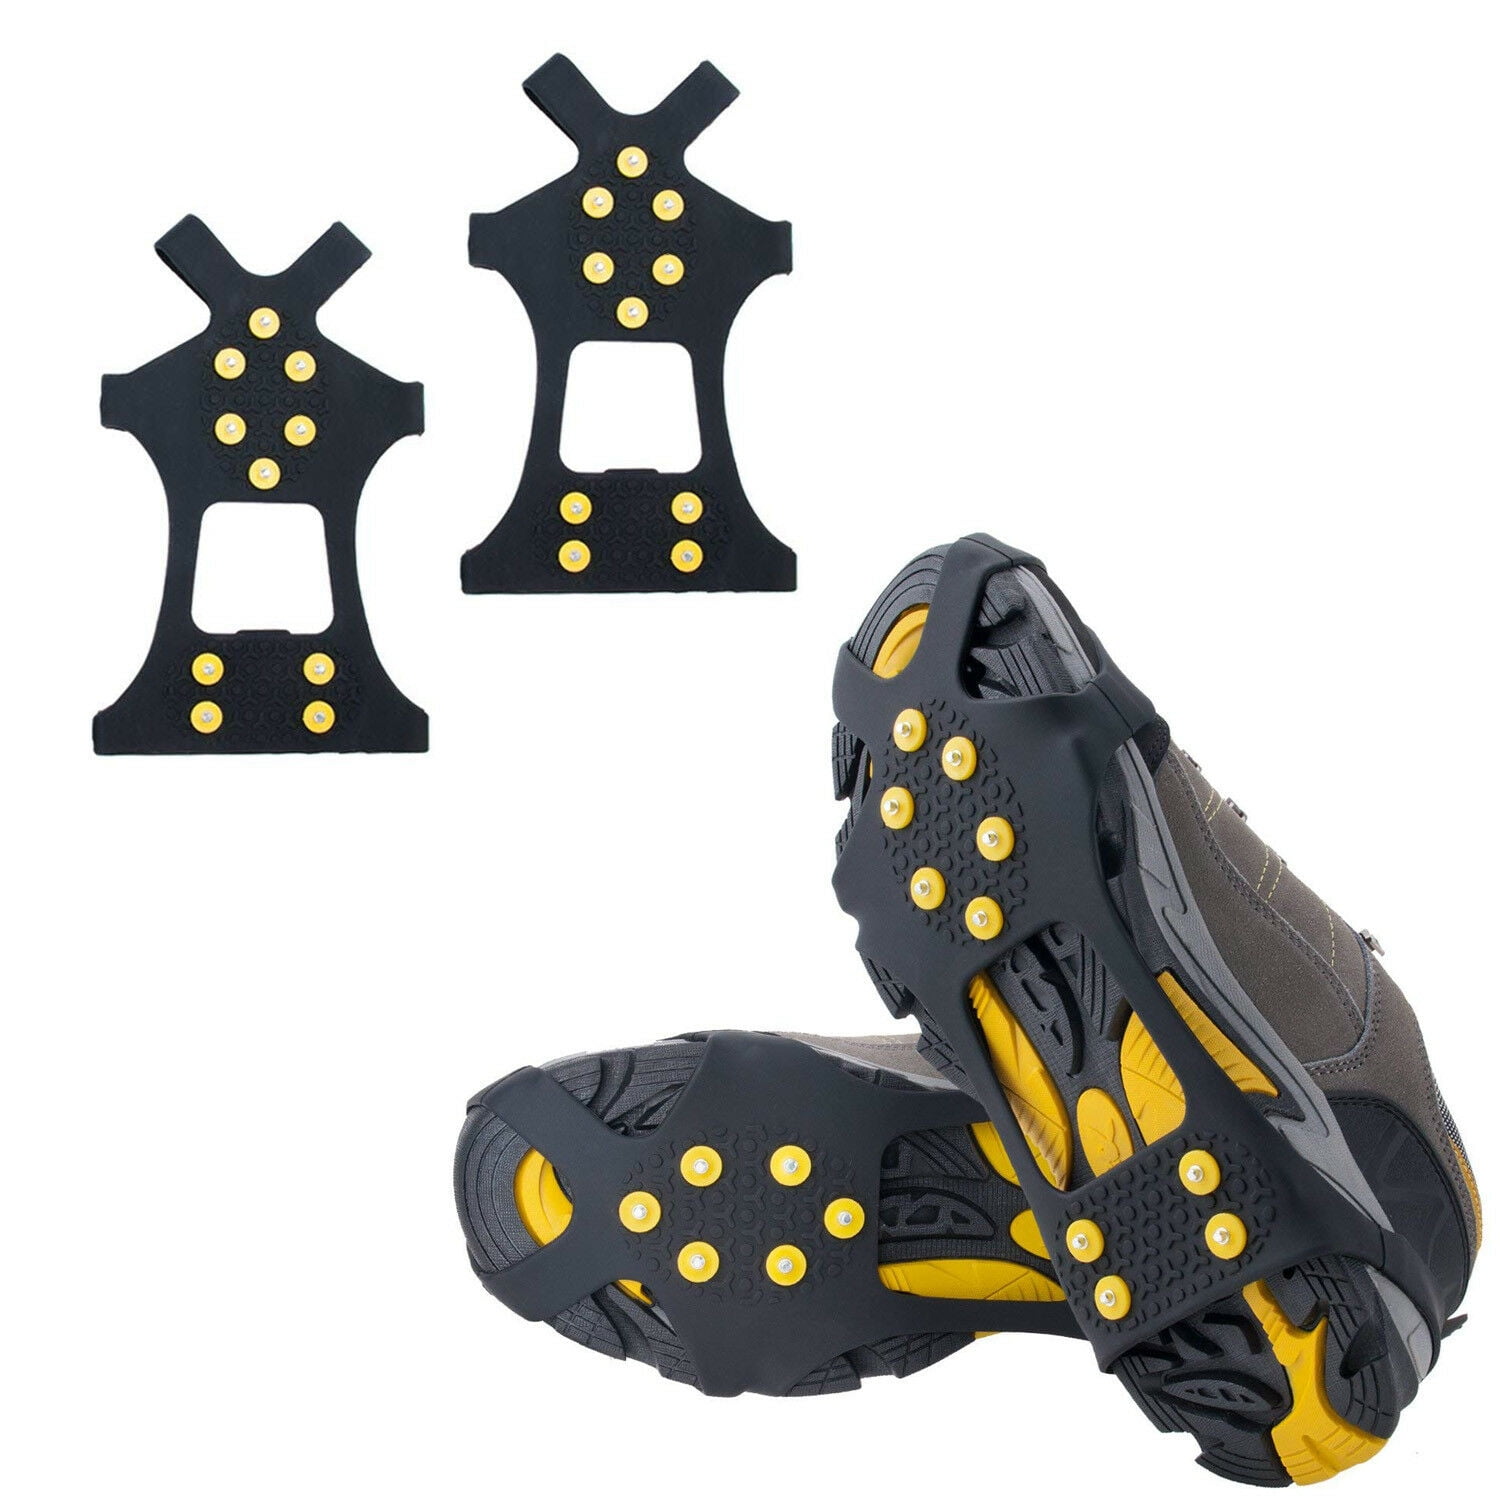 Ice Snow Spikes Grips Grippers Crampon Cleats for Shoes BOOTS Overshoe Anti Slip 